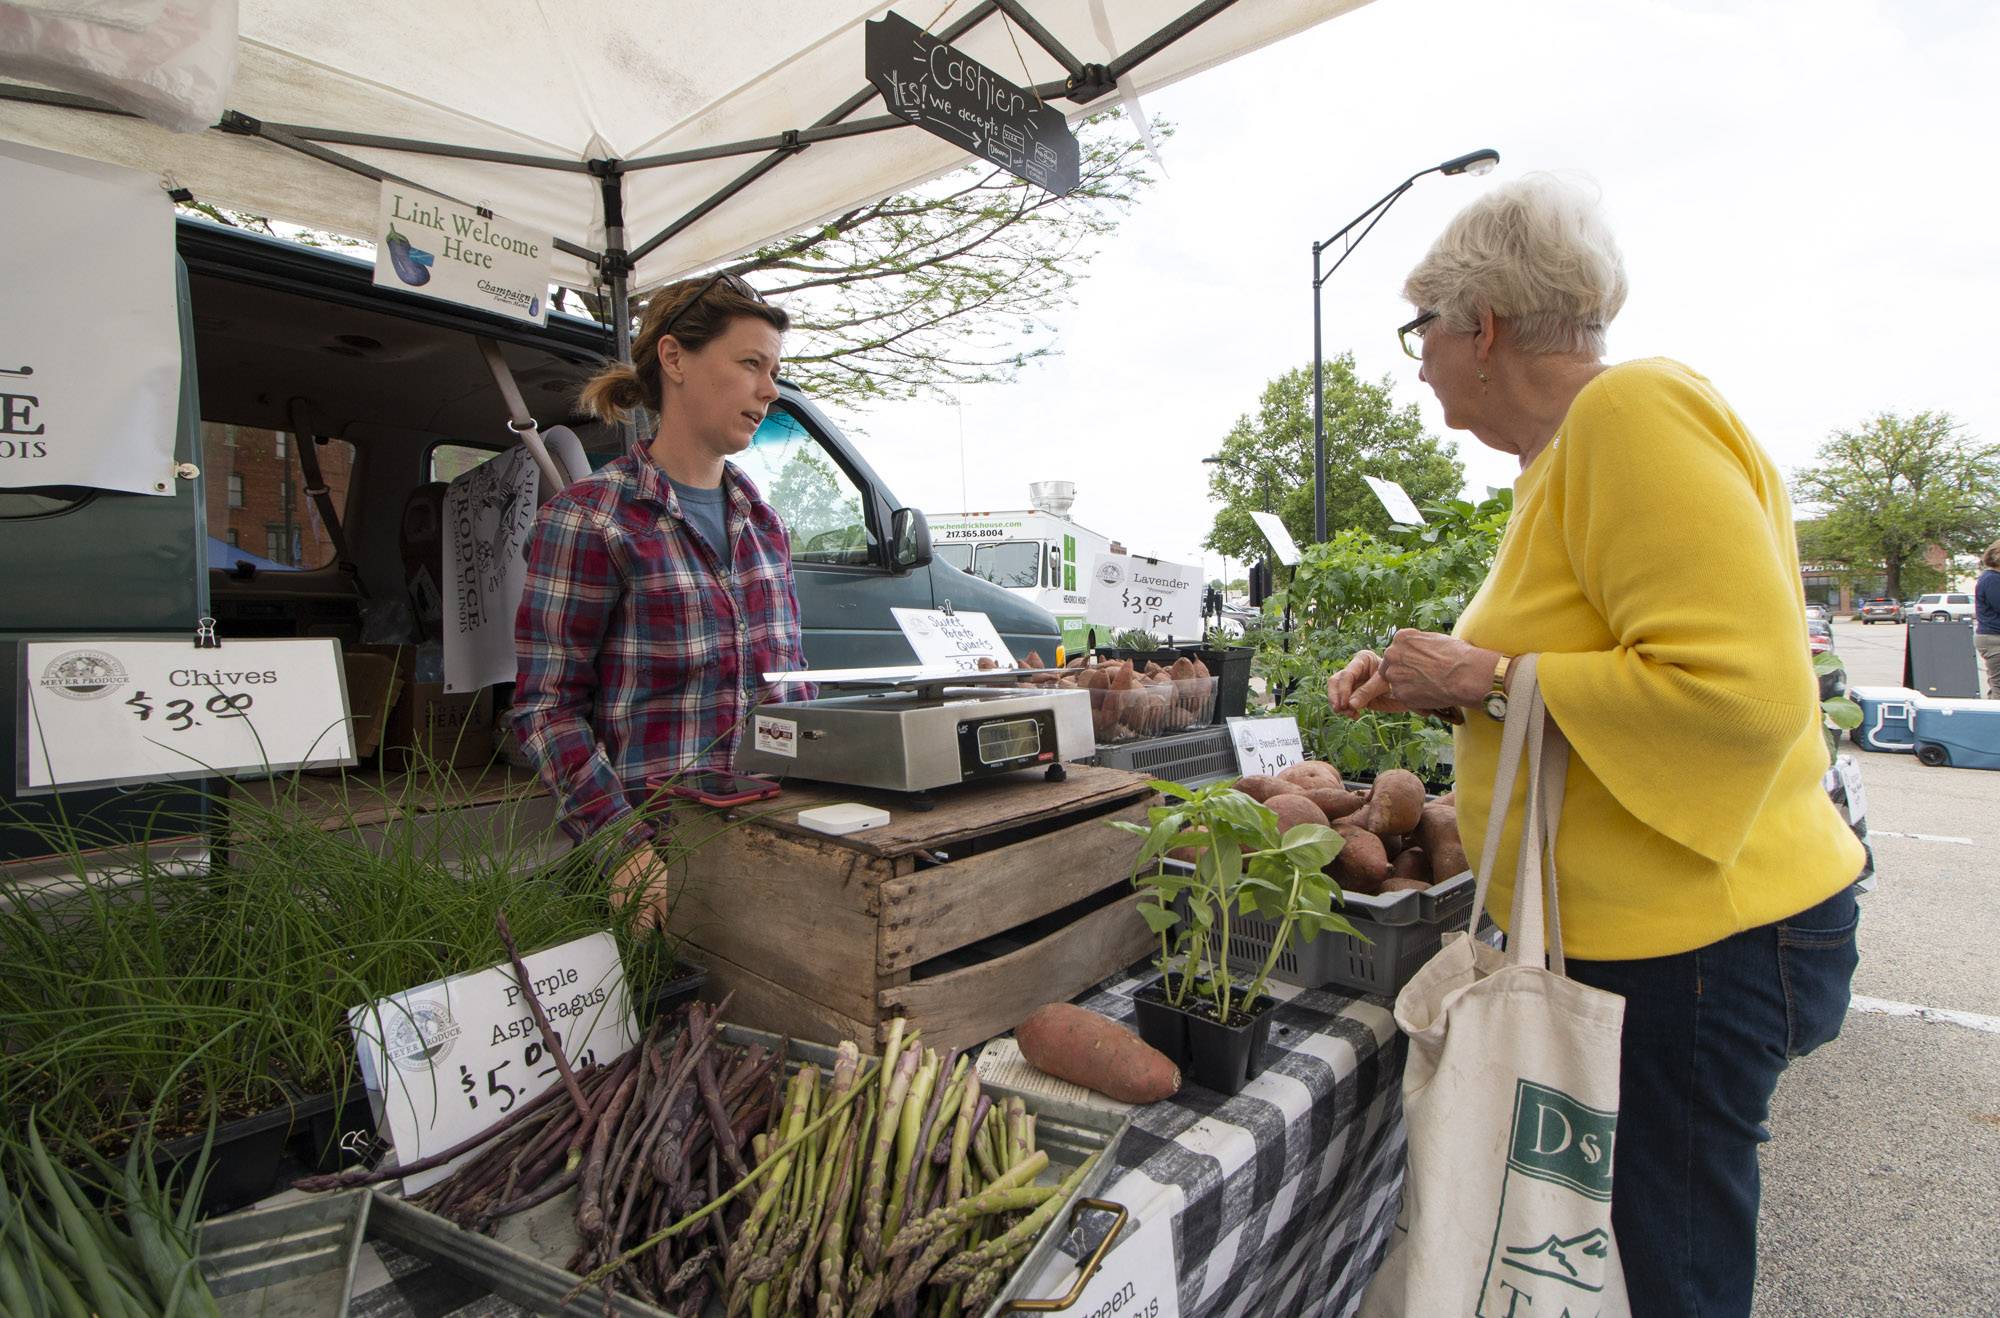 Check out some fresh produce from the first week of Champaign’s Farmers Market